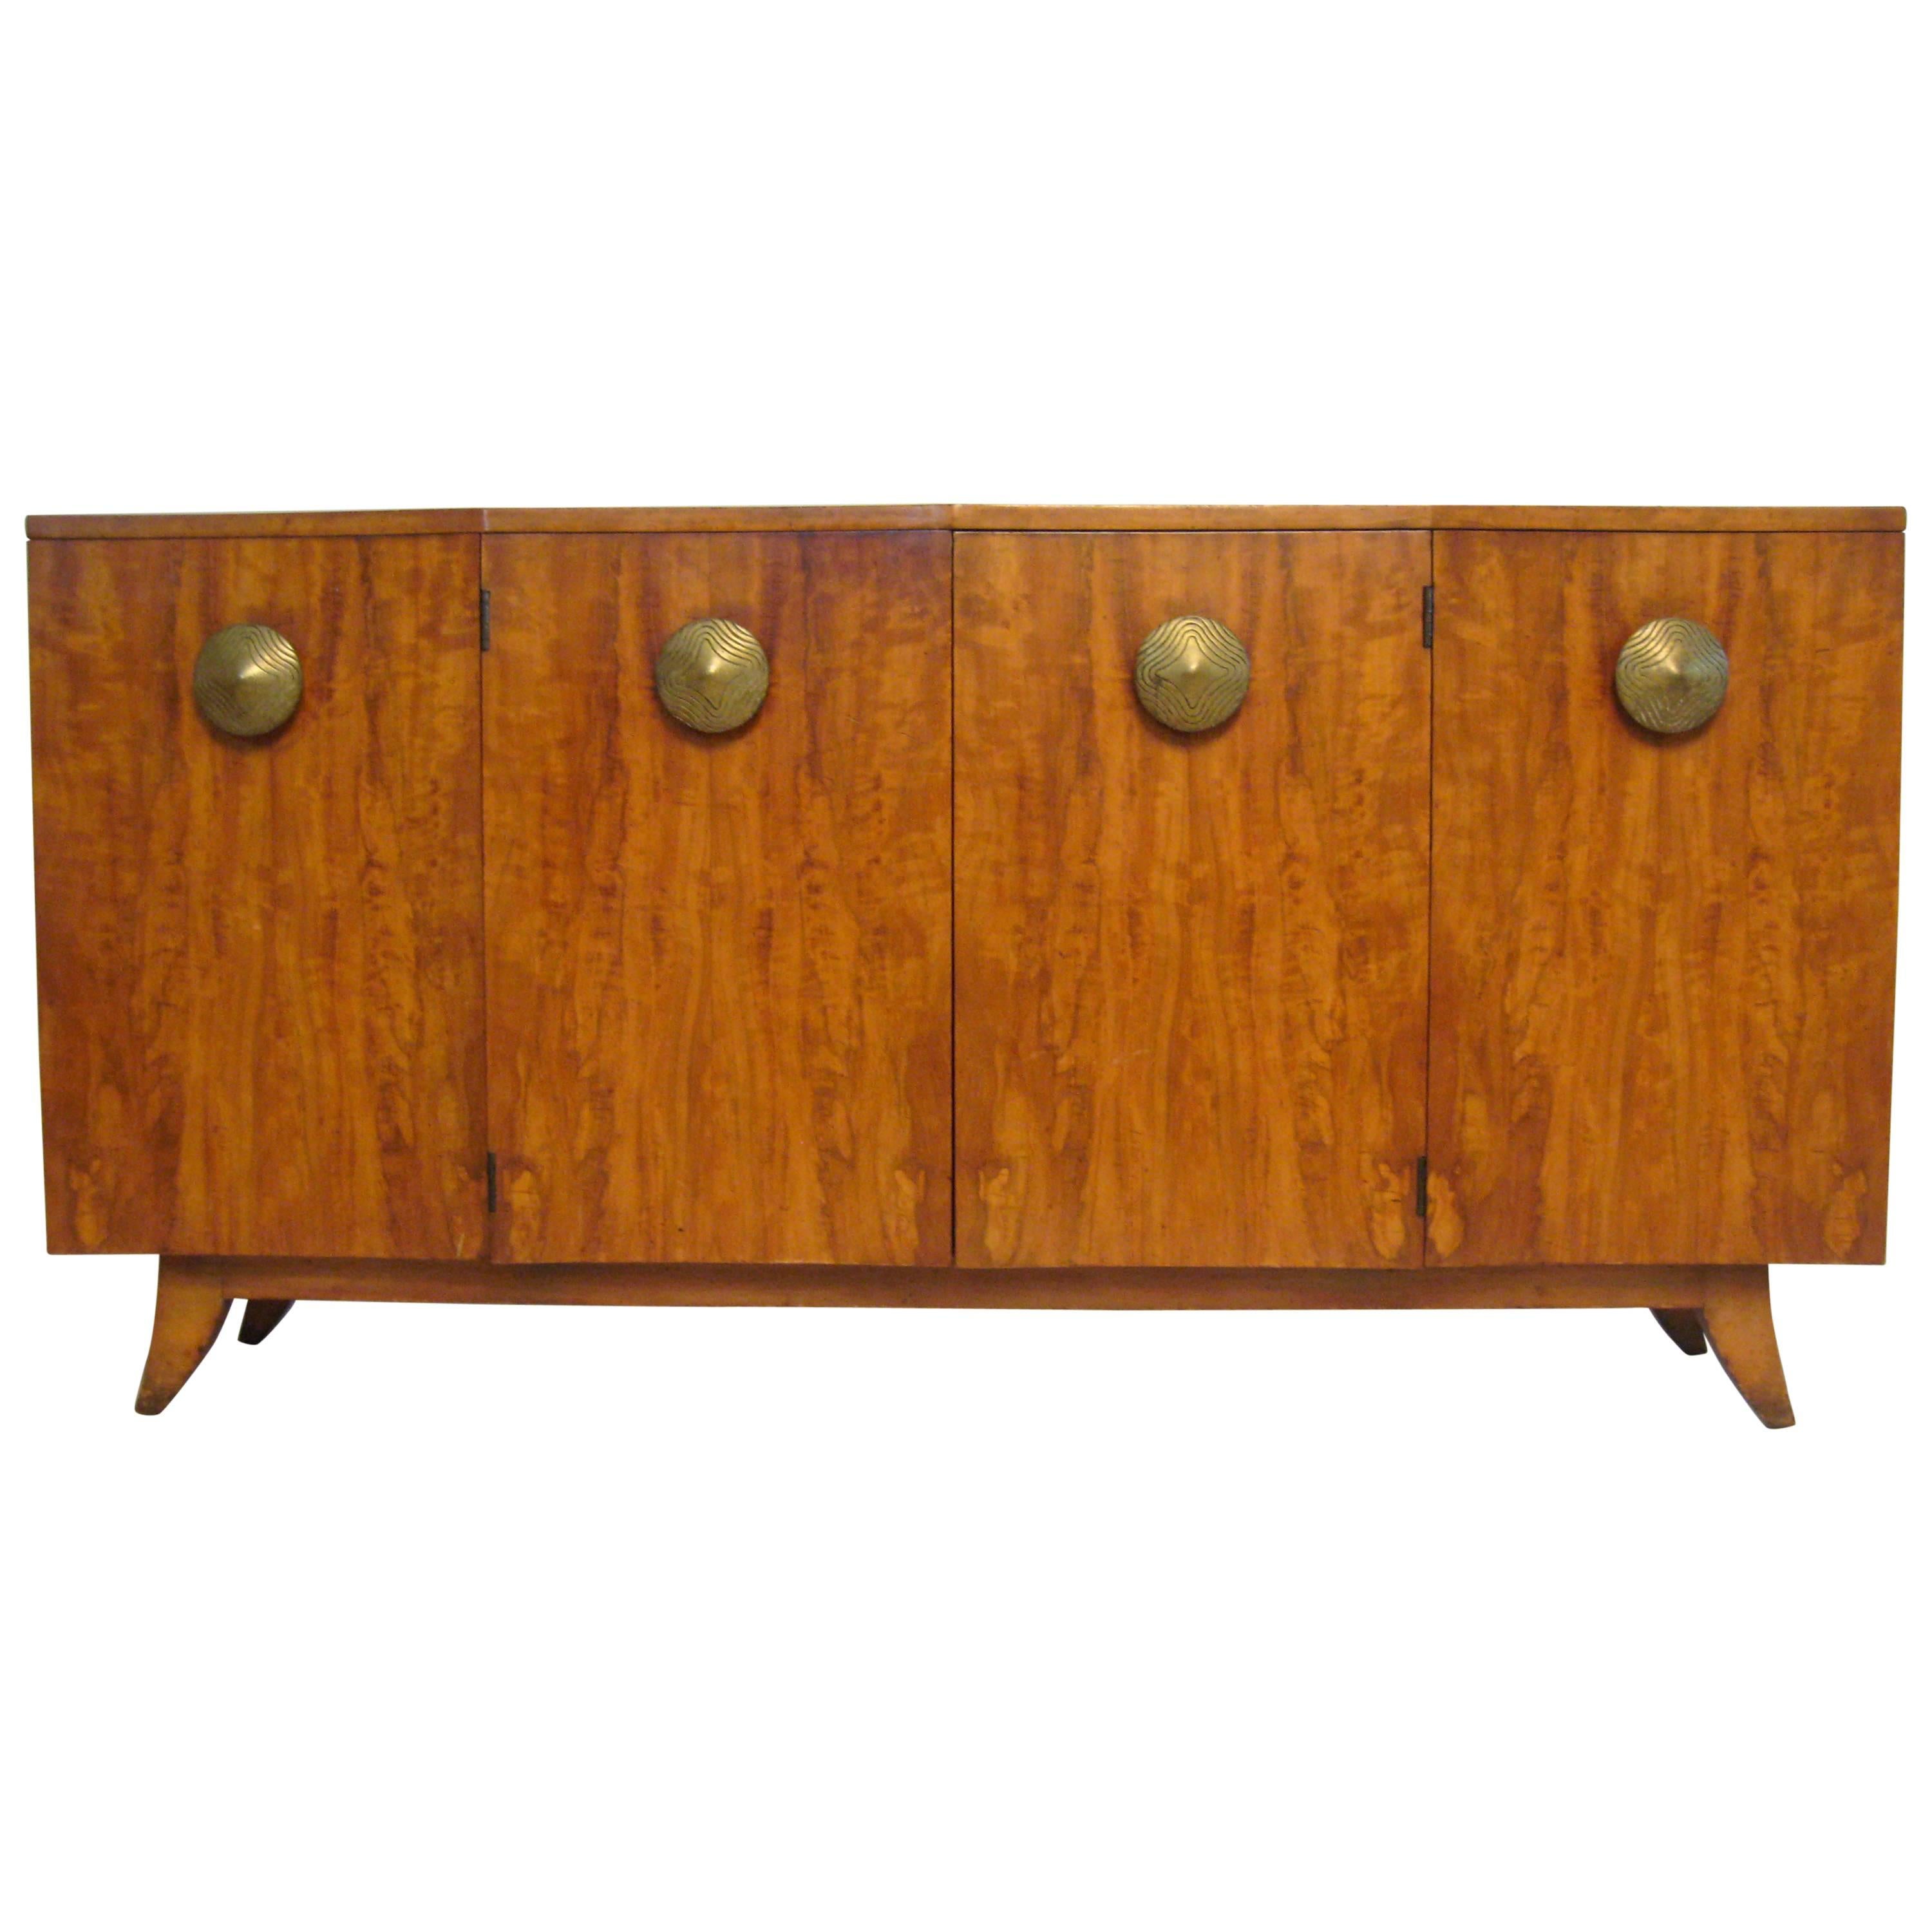 Gilbert Rohde for Herman Miller, Paldao Collection Sideboard